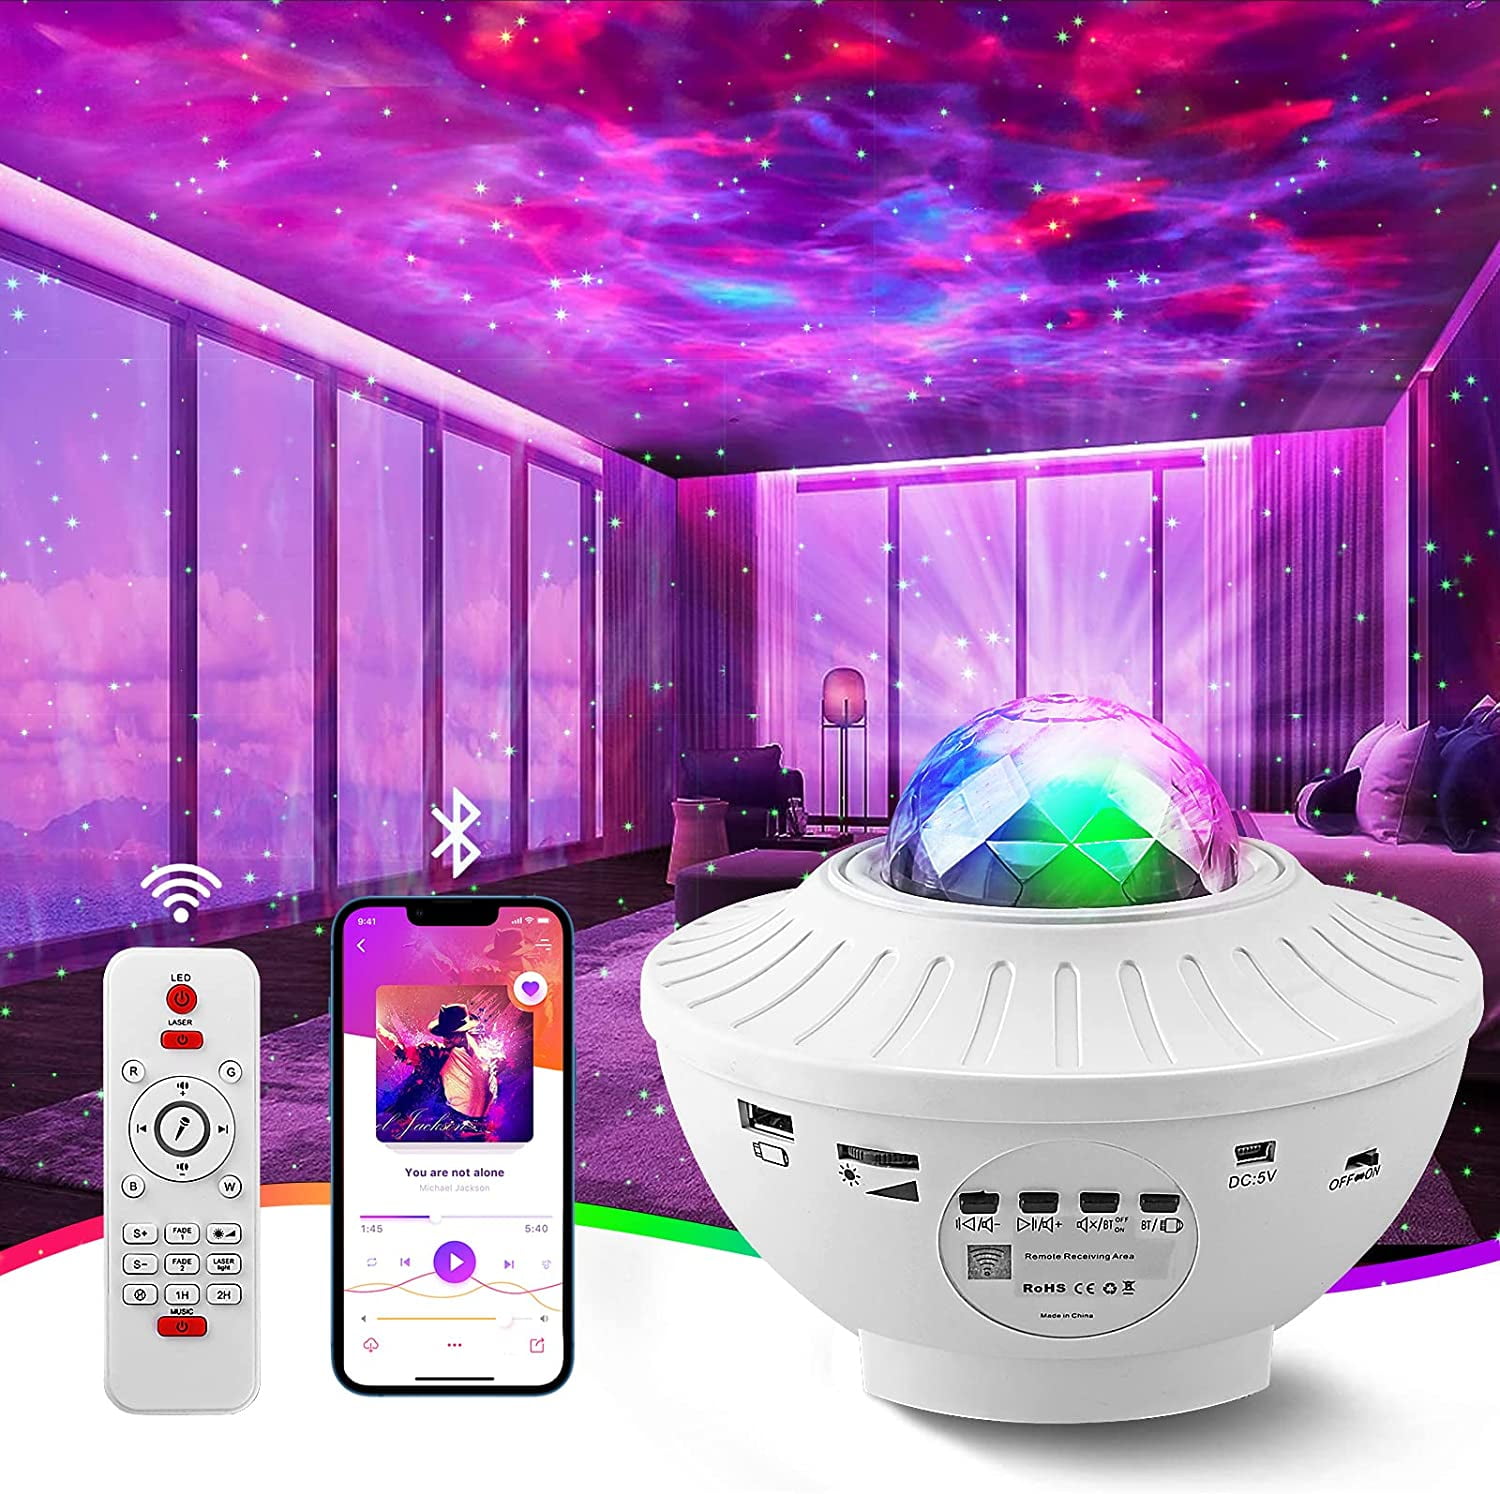 Galaxy Light Projector, Star Projector Night Light for 5 in 1 Sky Light with Remote Control, Bluetooth Music Speaker, Lights Sky Light for Bedroom Ceiling for Adults - Walmart.com